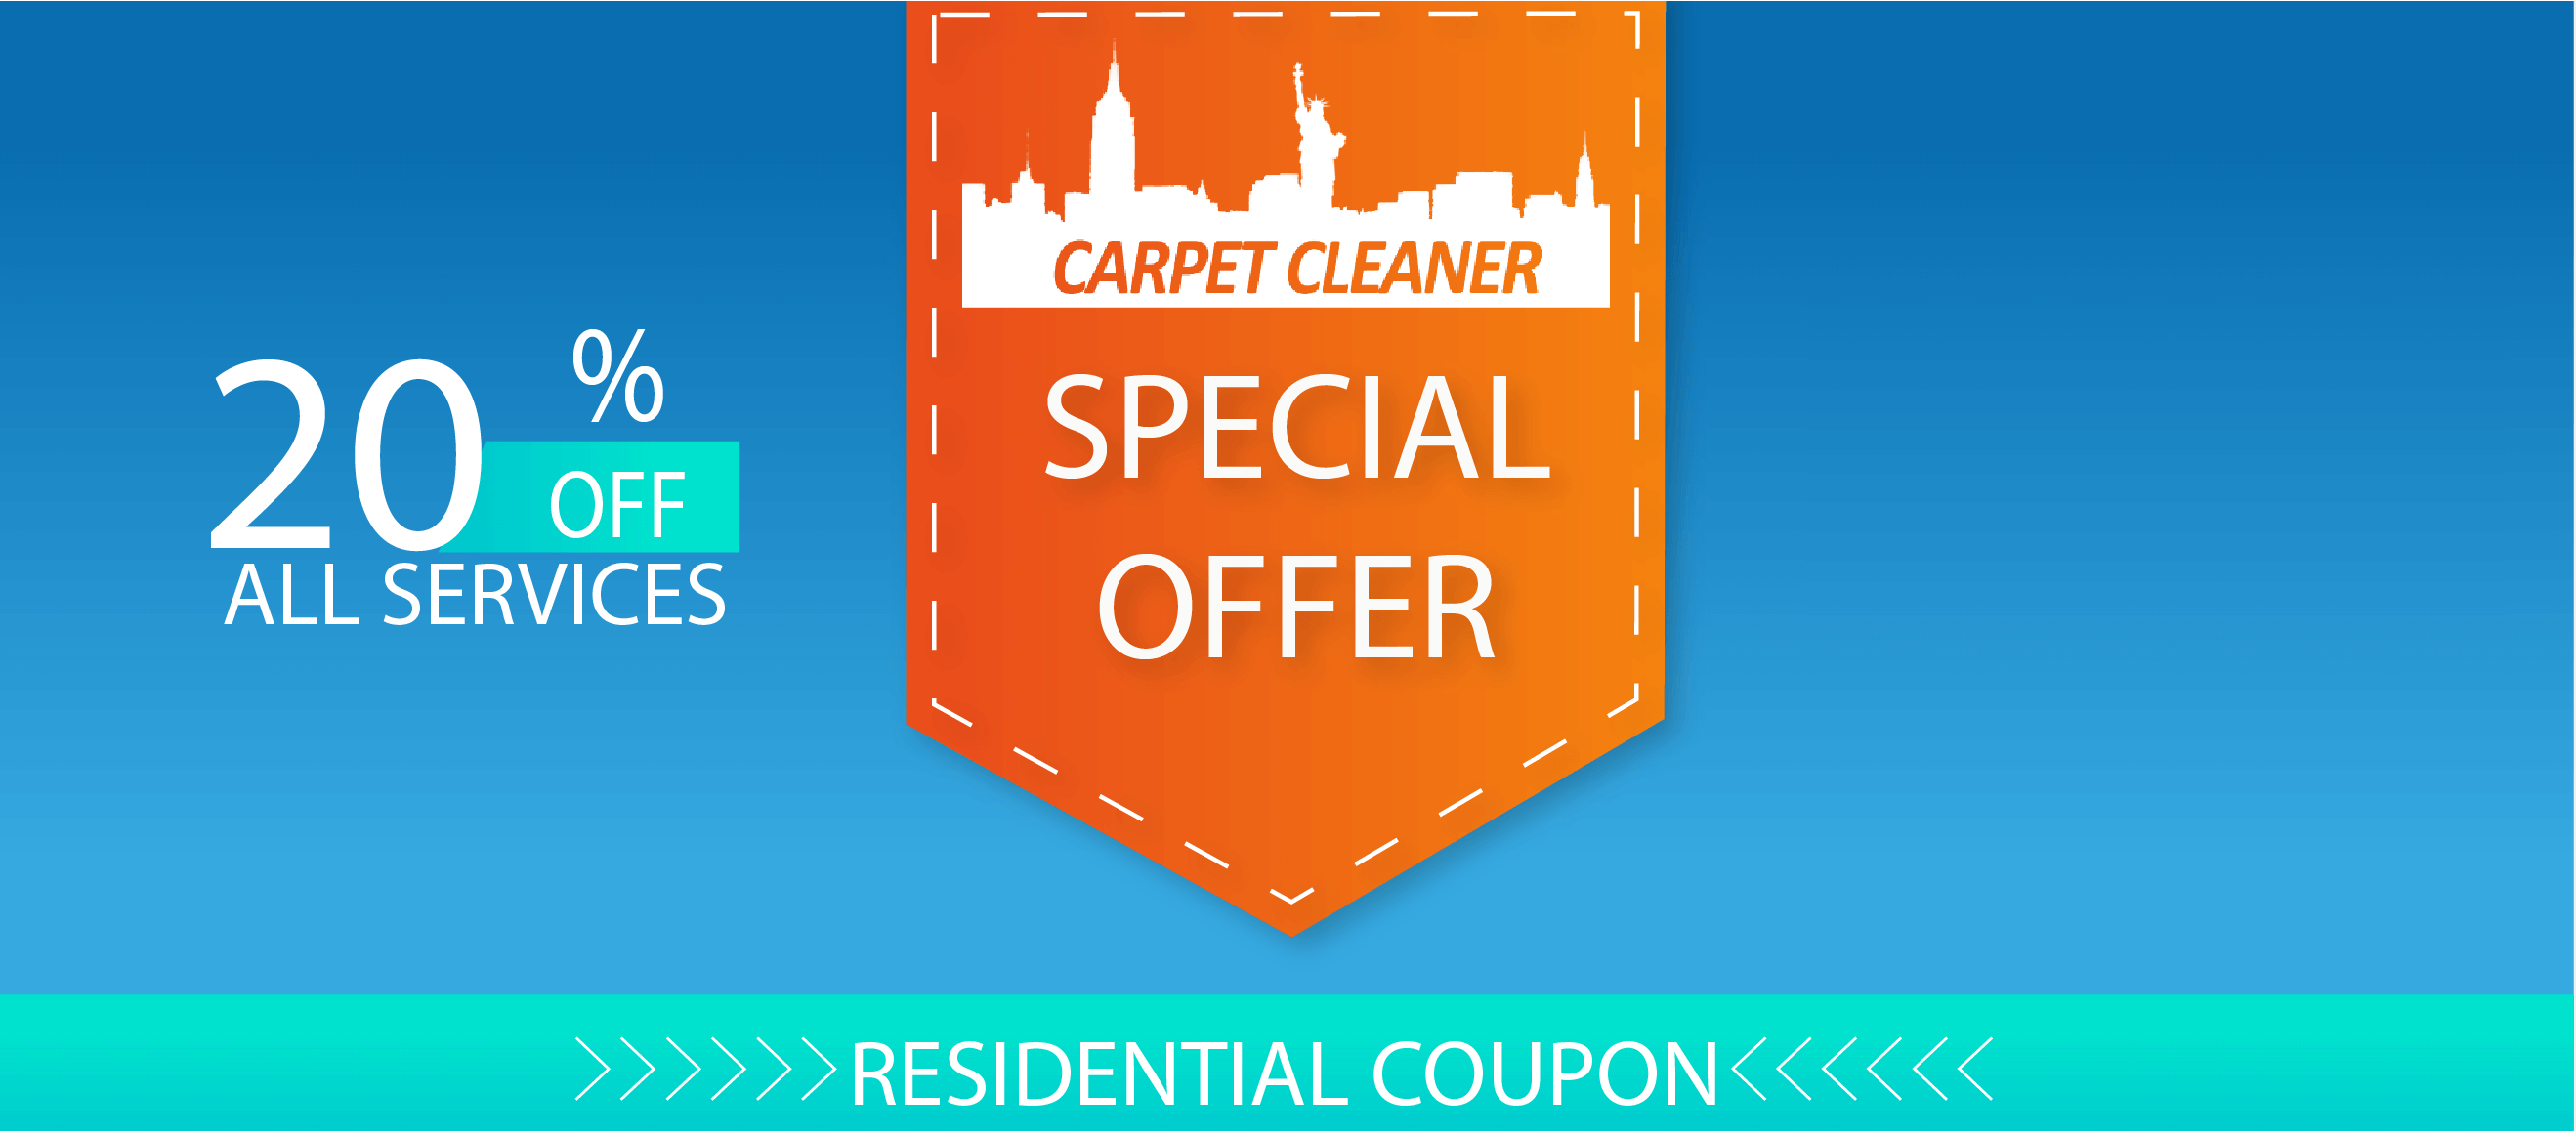 Carpet Cleaner Apartments and Homes special offer